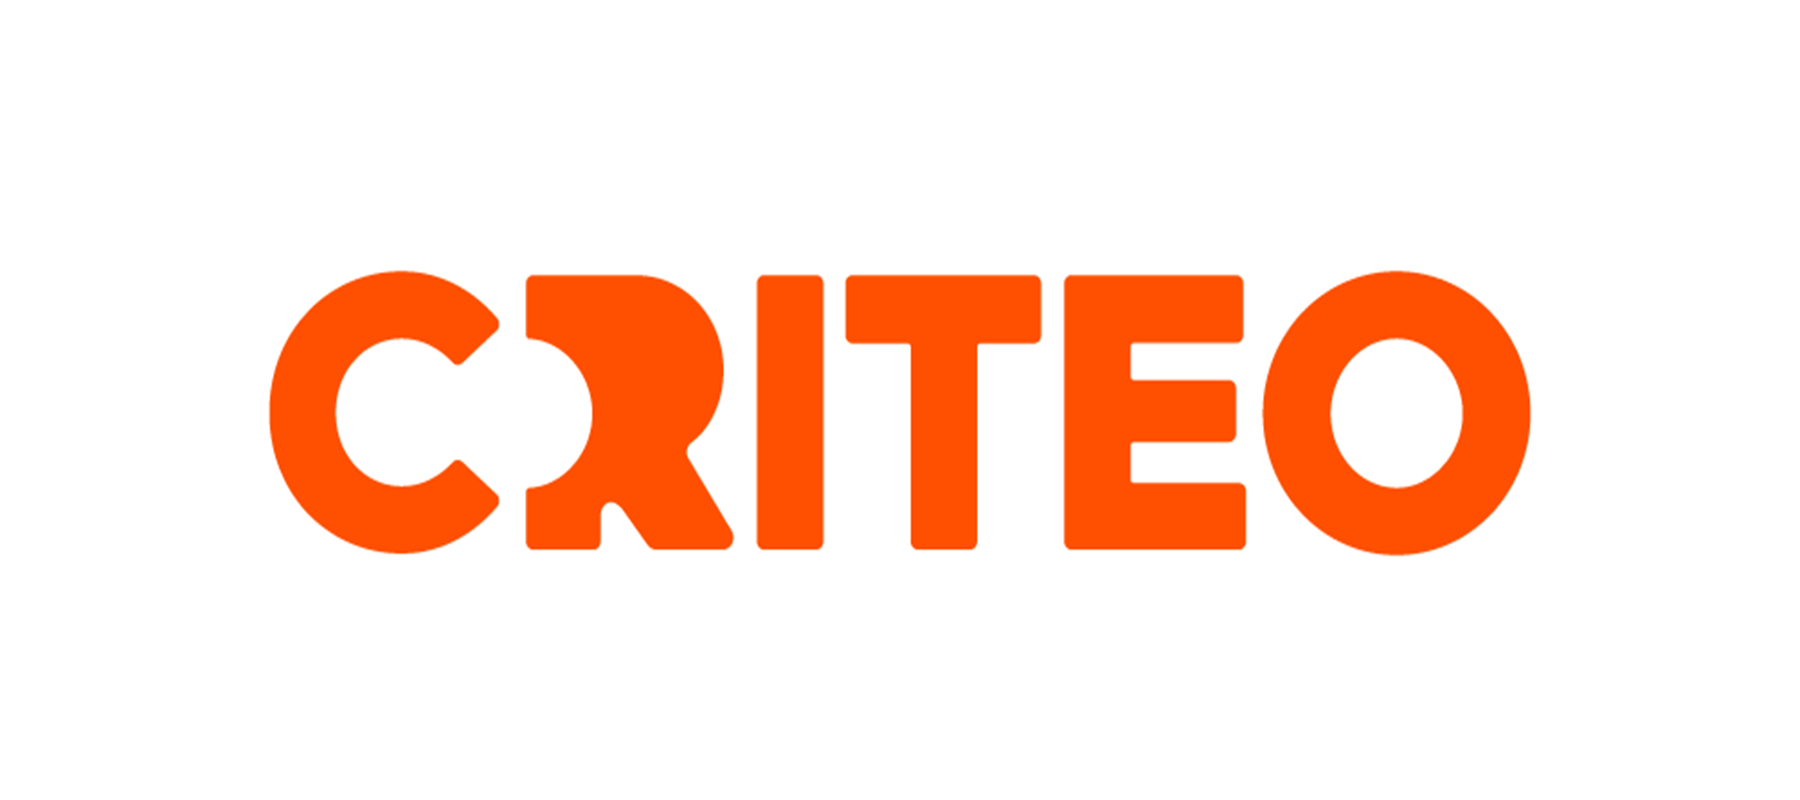 Dollar General selects Criteo to enhance its retail media offering